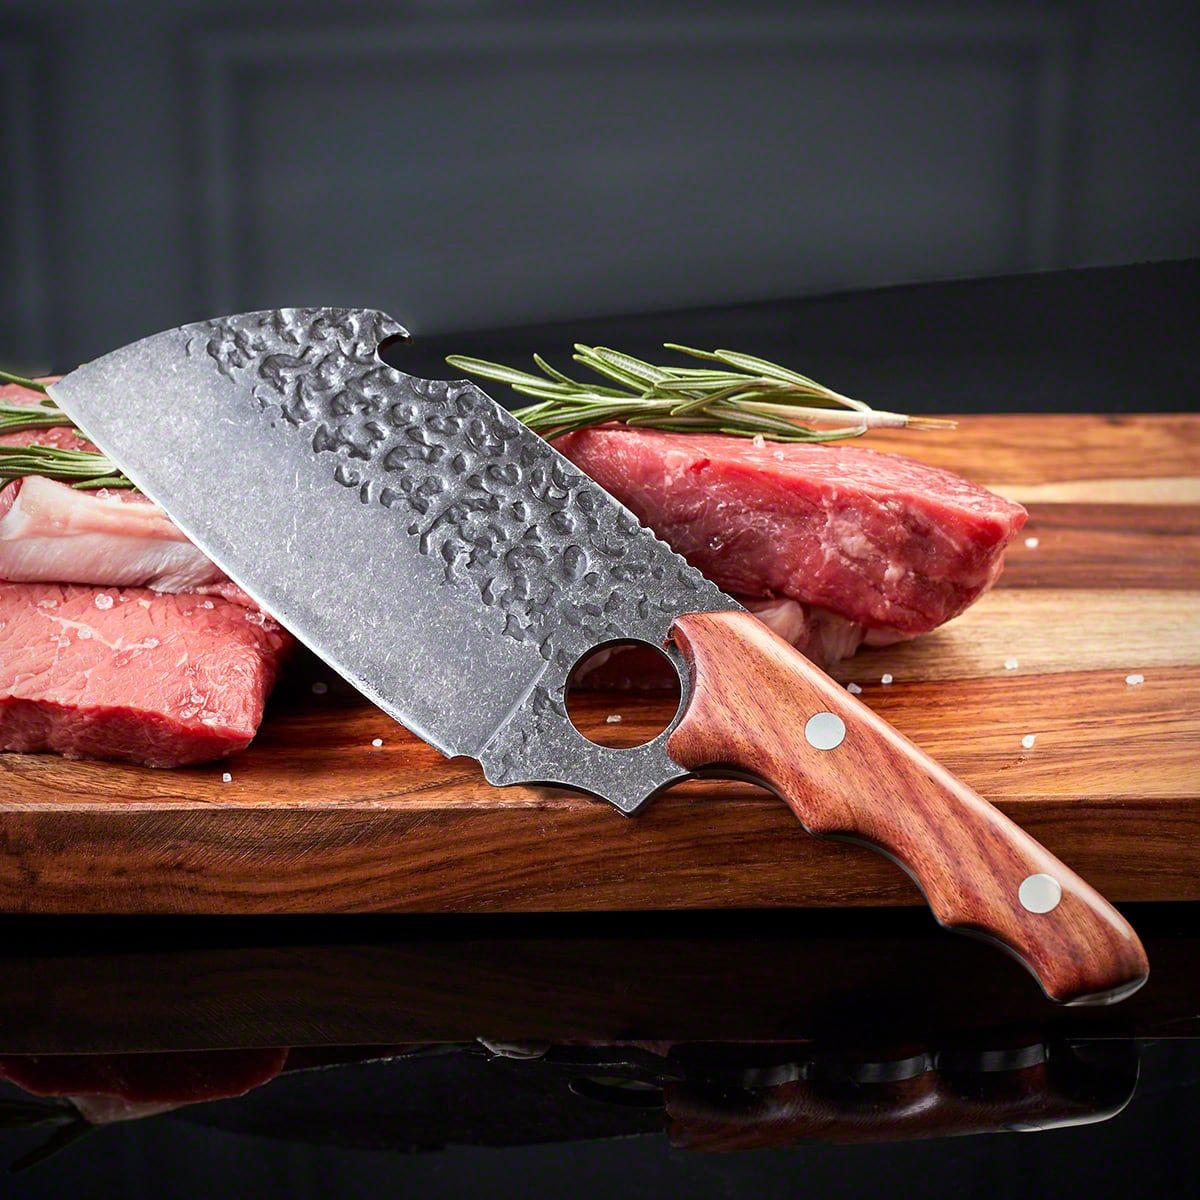 https://images.homewetbar.com/media/catalog/product/p/e/personalized-meat-cleaver-with-sheathe-with-bottle-opener-p-10856.jpg?store=default&image-type=image